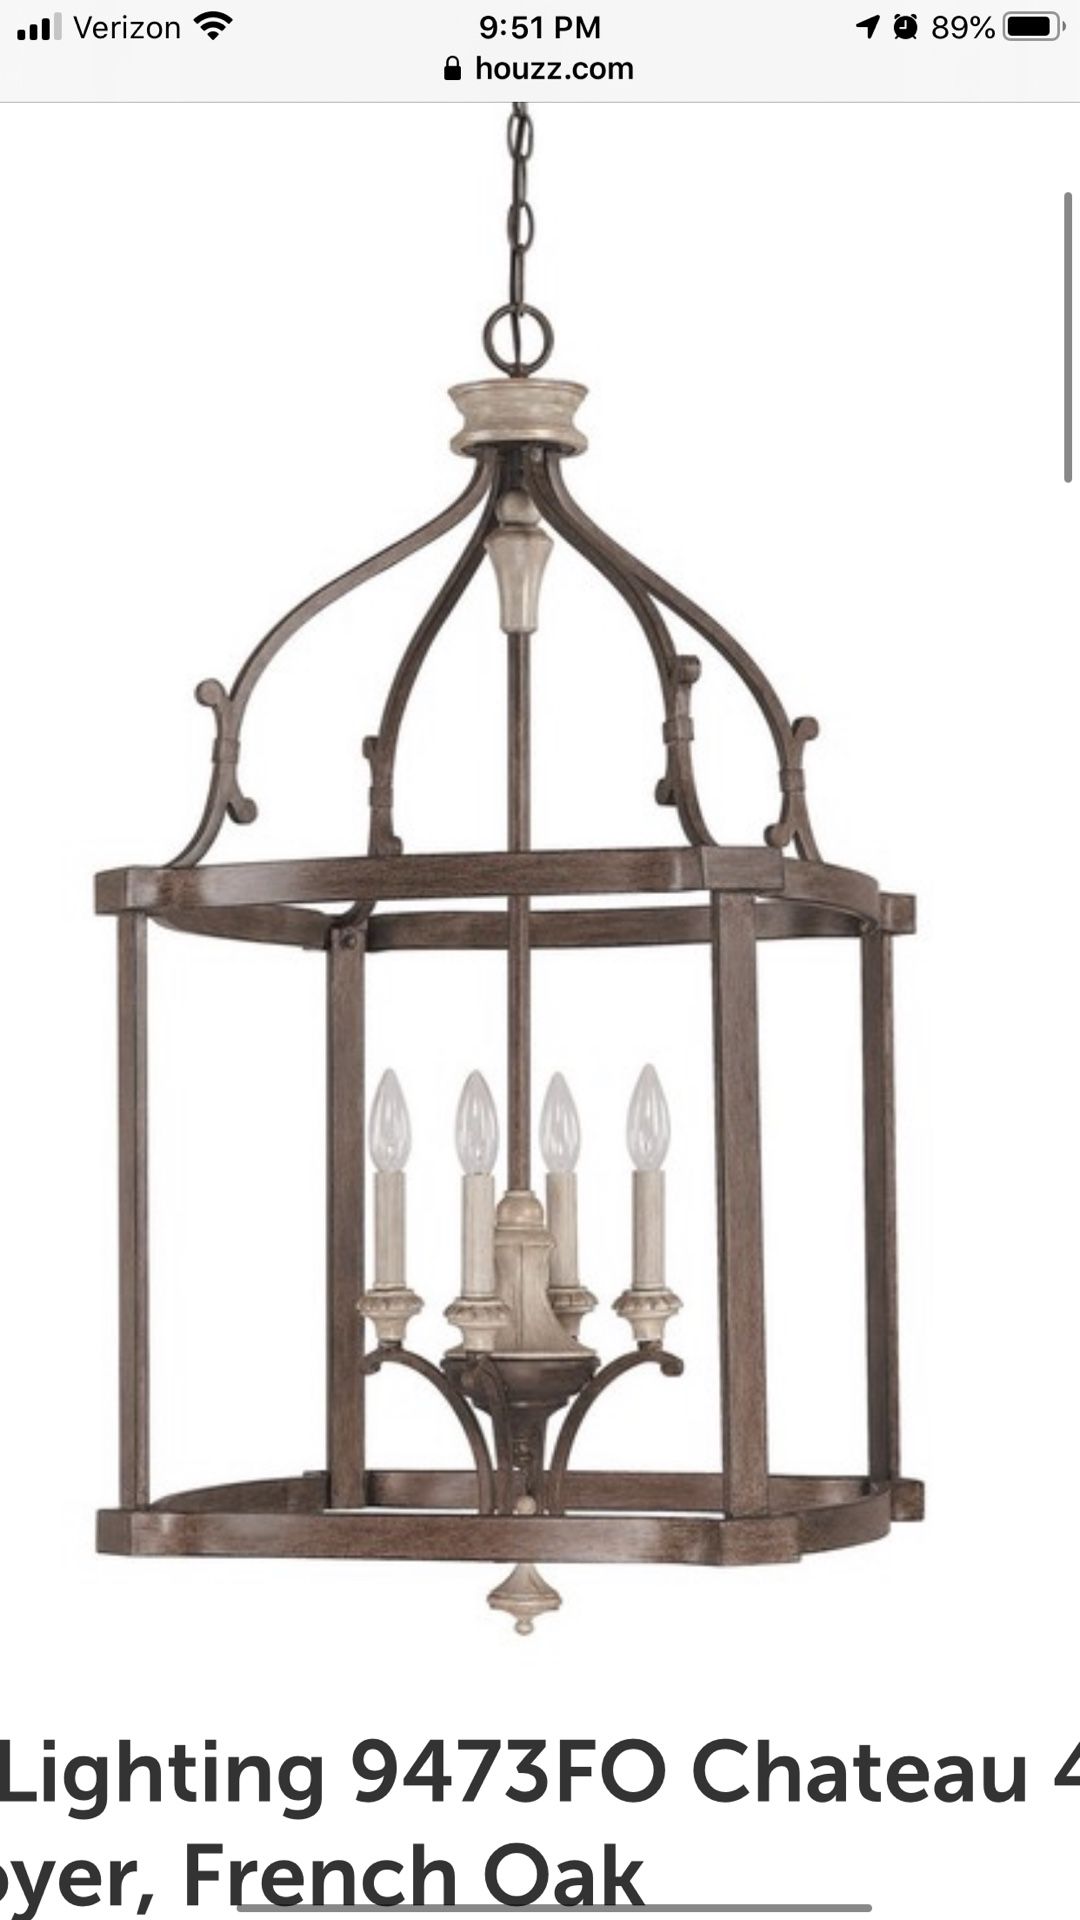 BRAND NEW IN BOX - Capital Lighting 9473FO Chateau 4 Light 20 inch French Oak Foyer Pendant Ceiling Light, indoor outdoor chandelier sconce light